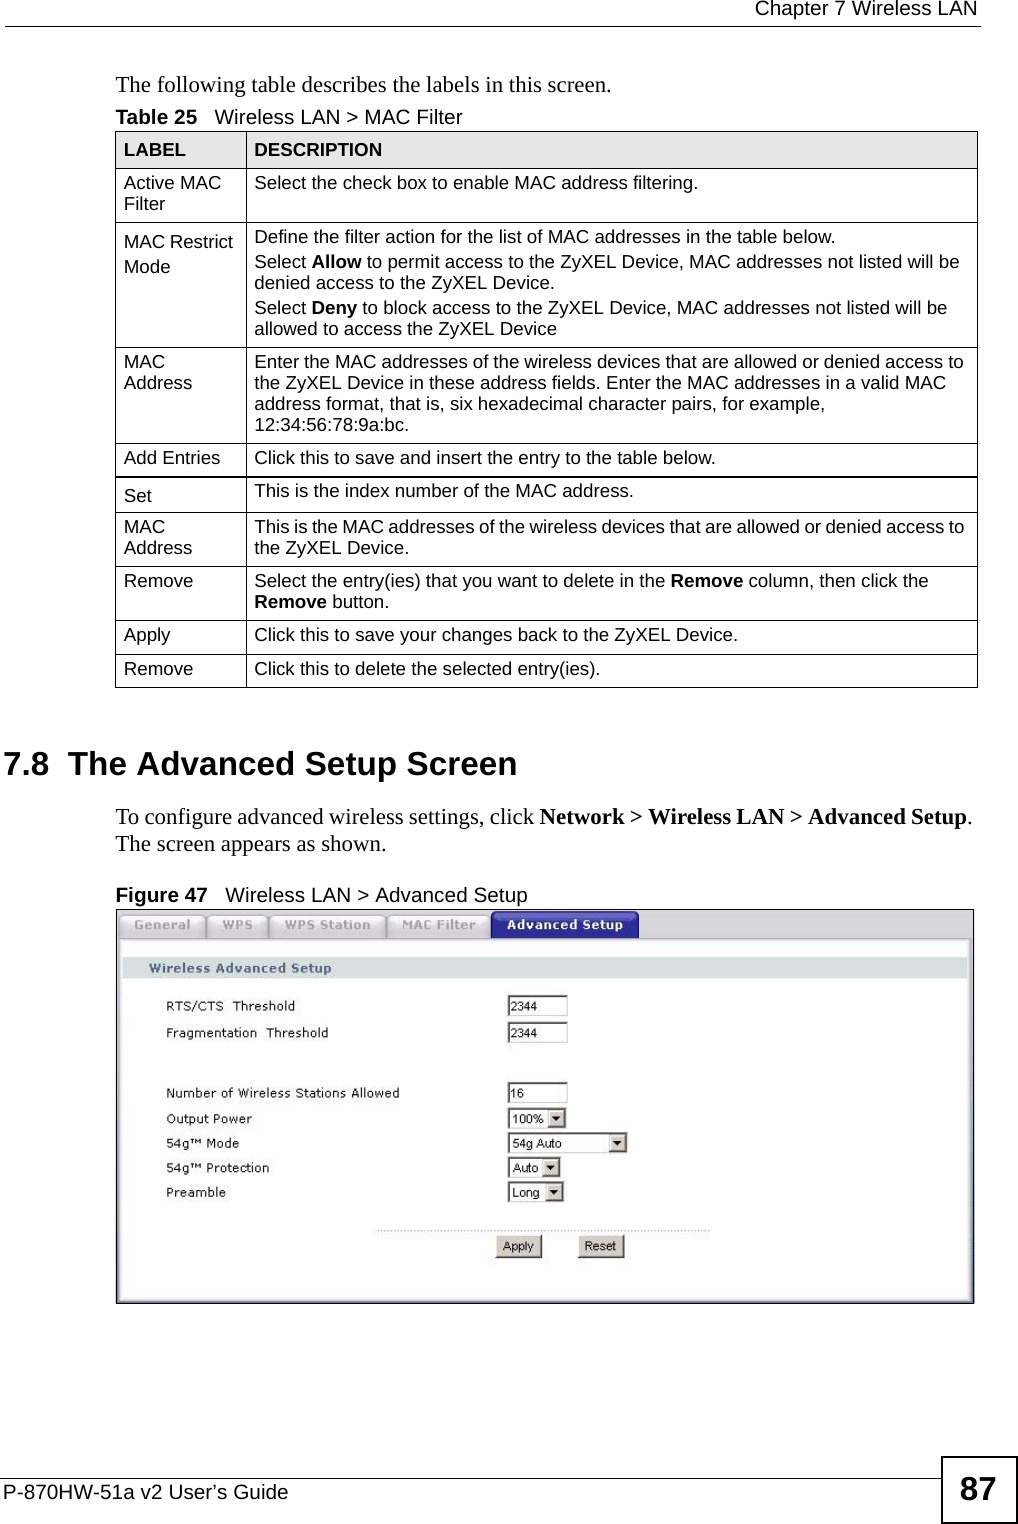  Chapter 7 Wireless LANP-870HW-51a v2 User’s Guide 87The following table describes the labels in this screen.7.8  The Advanced Setup Screen To configure advanced wireless settings, click Network &gt; Wireless LAN &gt; Advanced Setup. The screen appears as shown.Figure 47   Wireless LAN &gt; Advanced SetupTable 25   Wireless LAN &gt; MAC FilterLABEL DESCRIPTIONActive MAC Filter Select the check box to enable MAC address filtering.MAC Restrict Mode Define the filter action for the list of MAC addresses in the table below. Select Allow to permit access to the ZyXEL Device, MAC addresses not listed will be denied access to the ZyXEL Device. Select Deny to block access to the ZyXEL Device, MAC addresses not listed will be allowed to access the ZyXEL Device MAC Address Enter the MAC addresses of the wireless devices that are allowed or denied access to the ZyXEL Device in these address fields. Enter the MAC addresses in a valid MAC address format, that is, six hexadecimal character pairs, for example, 12:34:56:78:9a:bc.Add Entries Click this to save and insert the entry to the table below.Set This is the index number of the MAC address.MAC Address This is the MAC addresses of the wireless devices that are allowed or denied access to the ZyXEL Device.Remove Select the entry(ies) that you want to delete in the Remove column, then click the Remove button.Apply Click this to save your changes back to the ZyXEL Device.Remove Click this to delete the selected entry(ies).